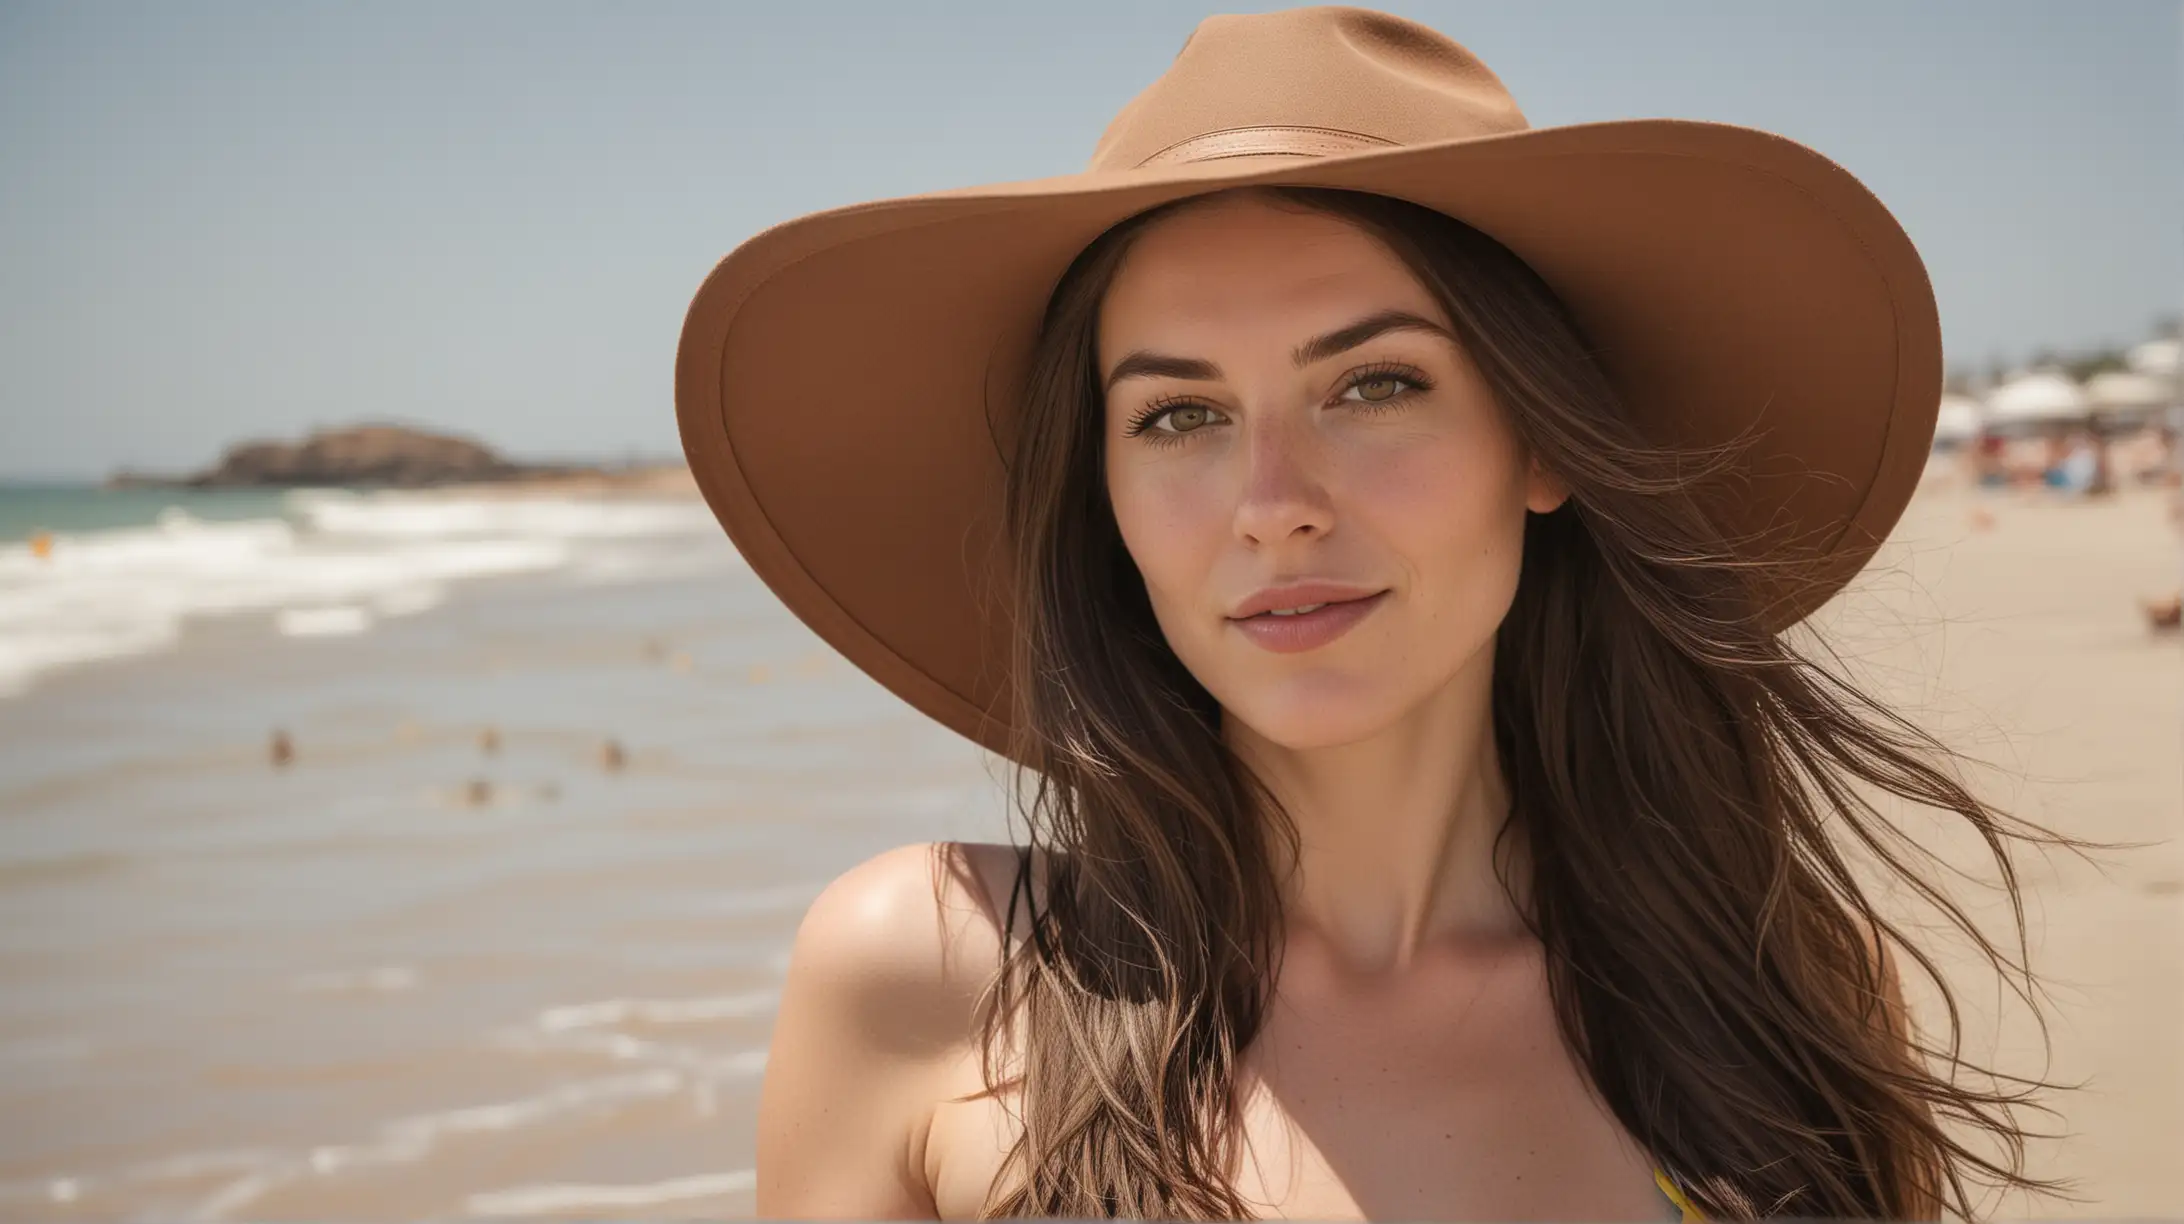 Pale Woman with Long Brown Hair in Bikini Hat at Empty Beach